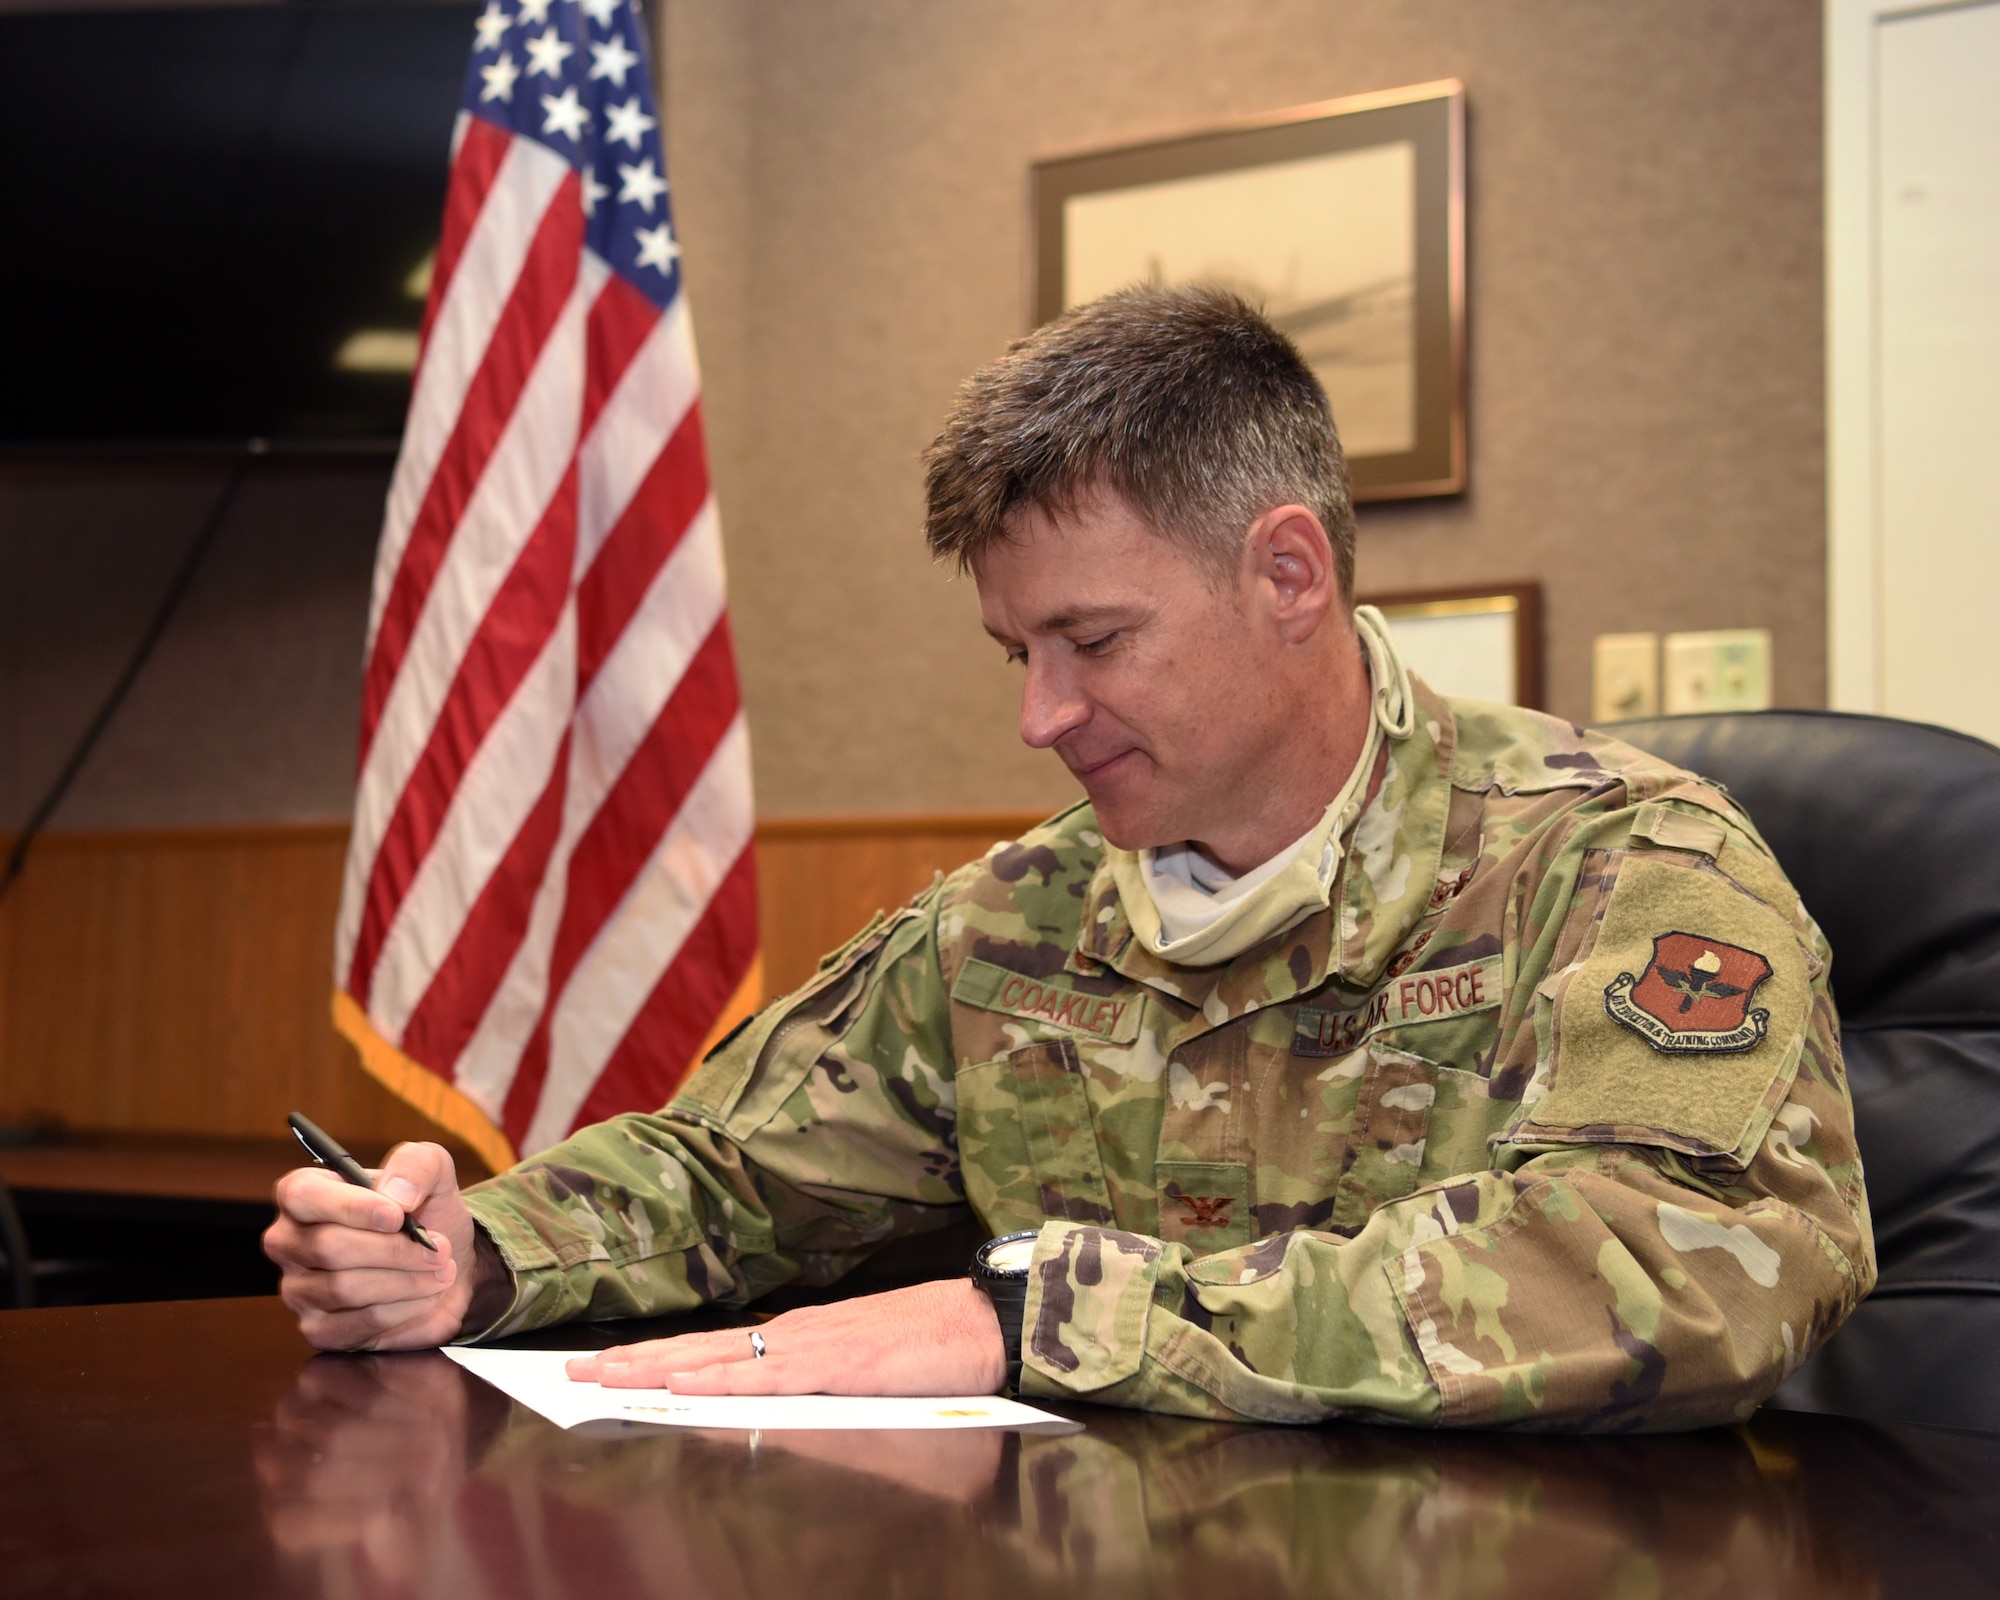 U.S. Air Force Col. Thomas Coakley, 17th Training Group commander, shows how he signs an articulation agreement amendment to an existing 2013 agreement between Angelo State University and the 17 TRG, during the COVID-19 pandemic, in the Brandenburg Hall on Goodfellow Air Force Base, Texas, June 2, 2020. The amended agreement allowed the 14N Intelligence Officer course graduates to transfer up to 12 semester hours towards three different ASU graduate programs for free. (U.S. Air Force photo by Airman 1st Class Abbey Rieves)